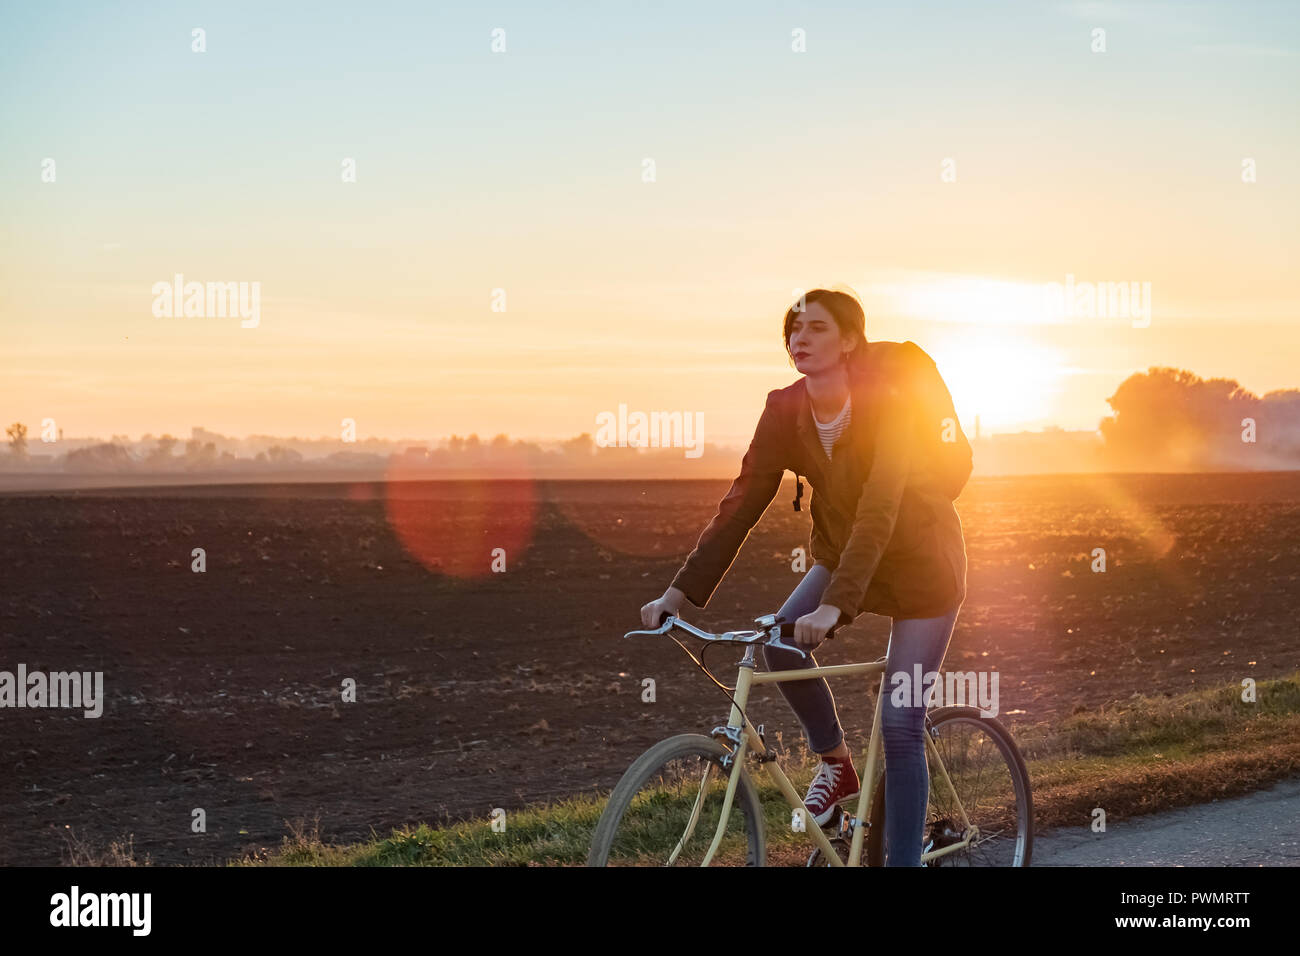 Female commuter riding a bike out of town. Woman cycling along the road at sunset Stock Photo